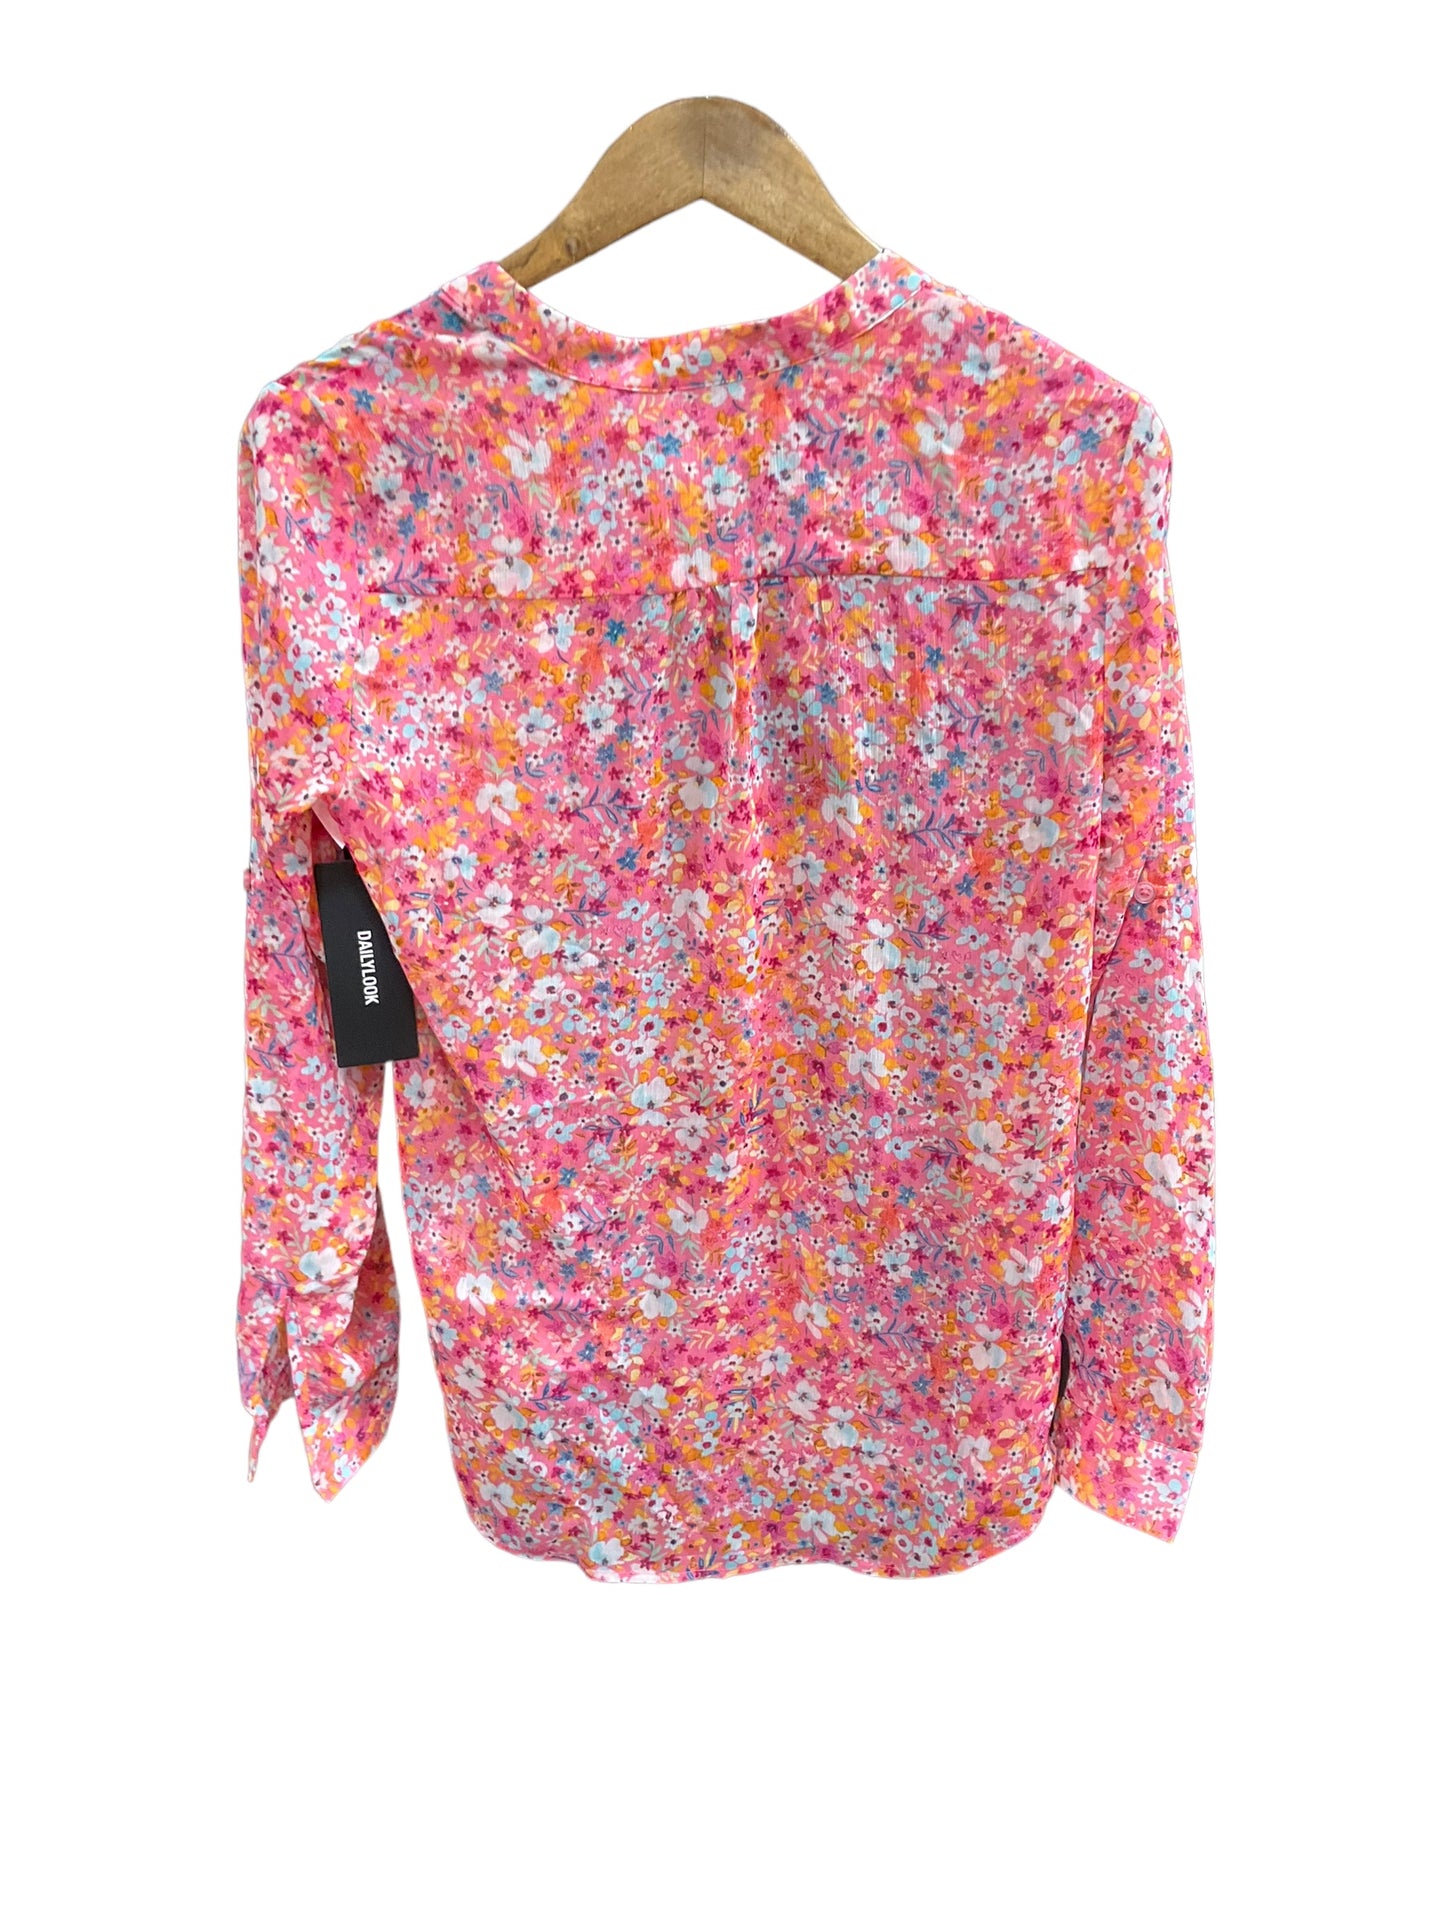 Blouse Long Sleeve By Kut  Size: S